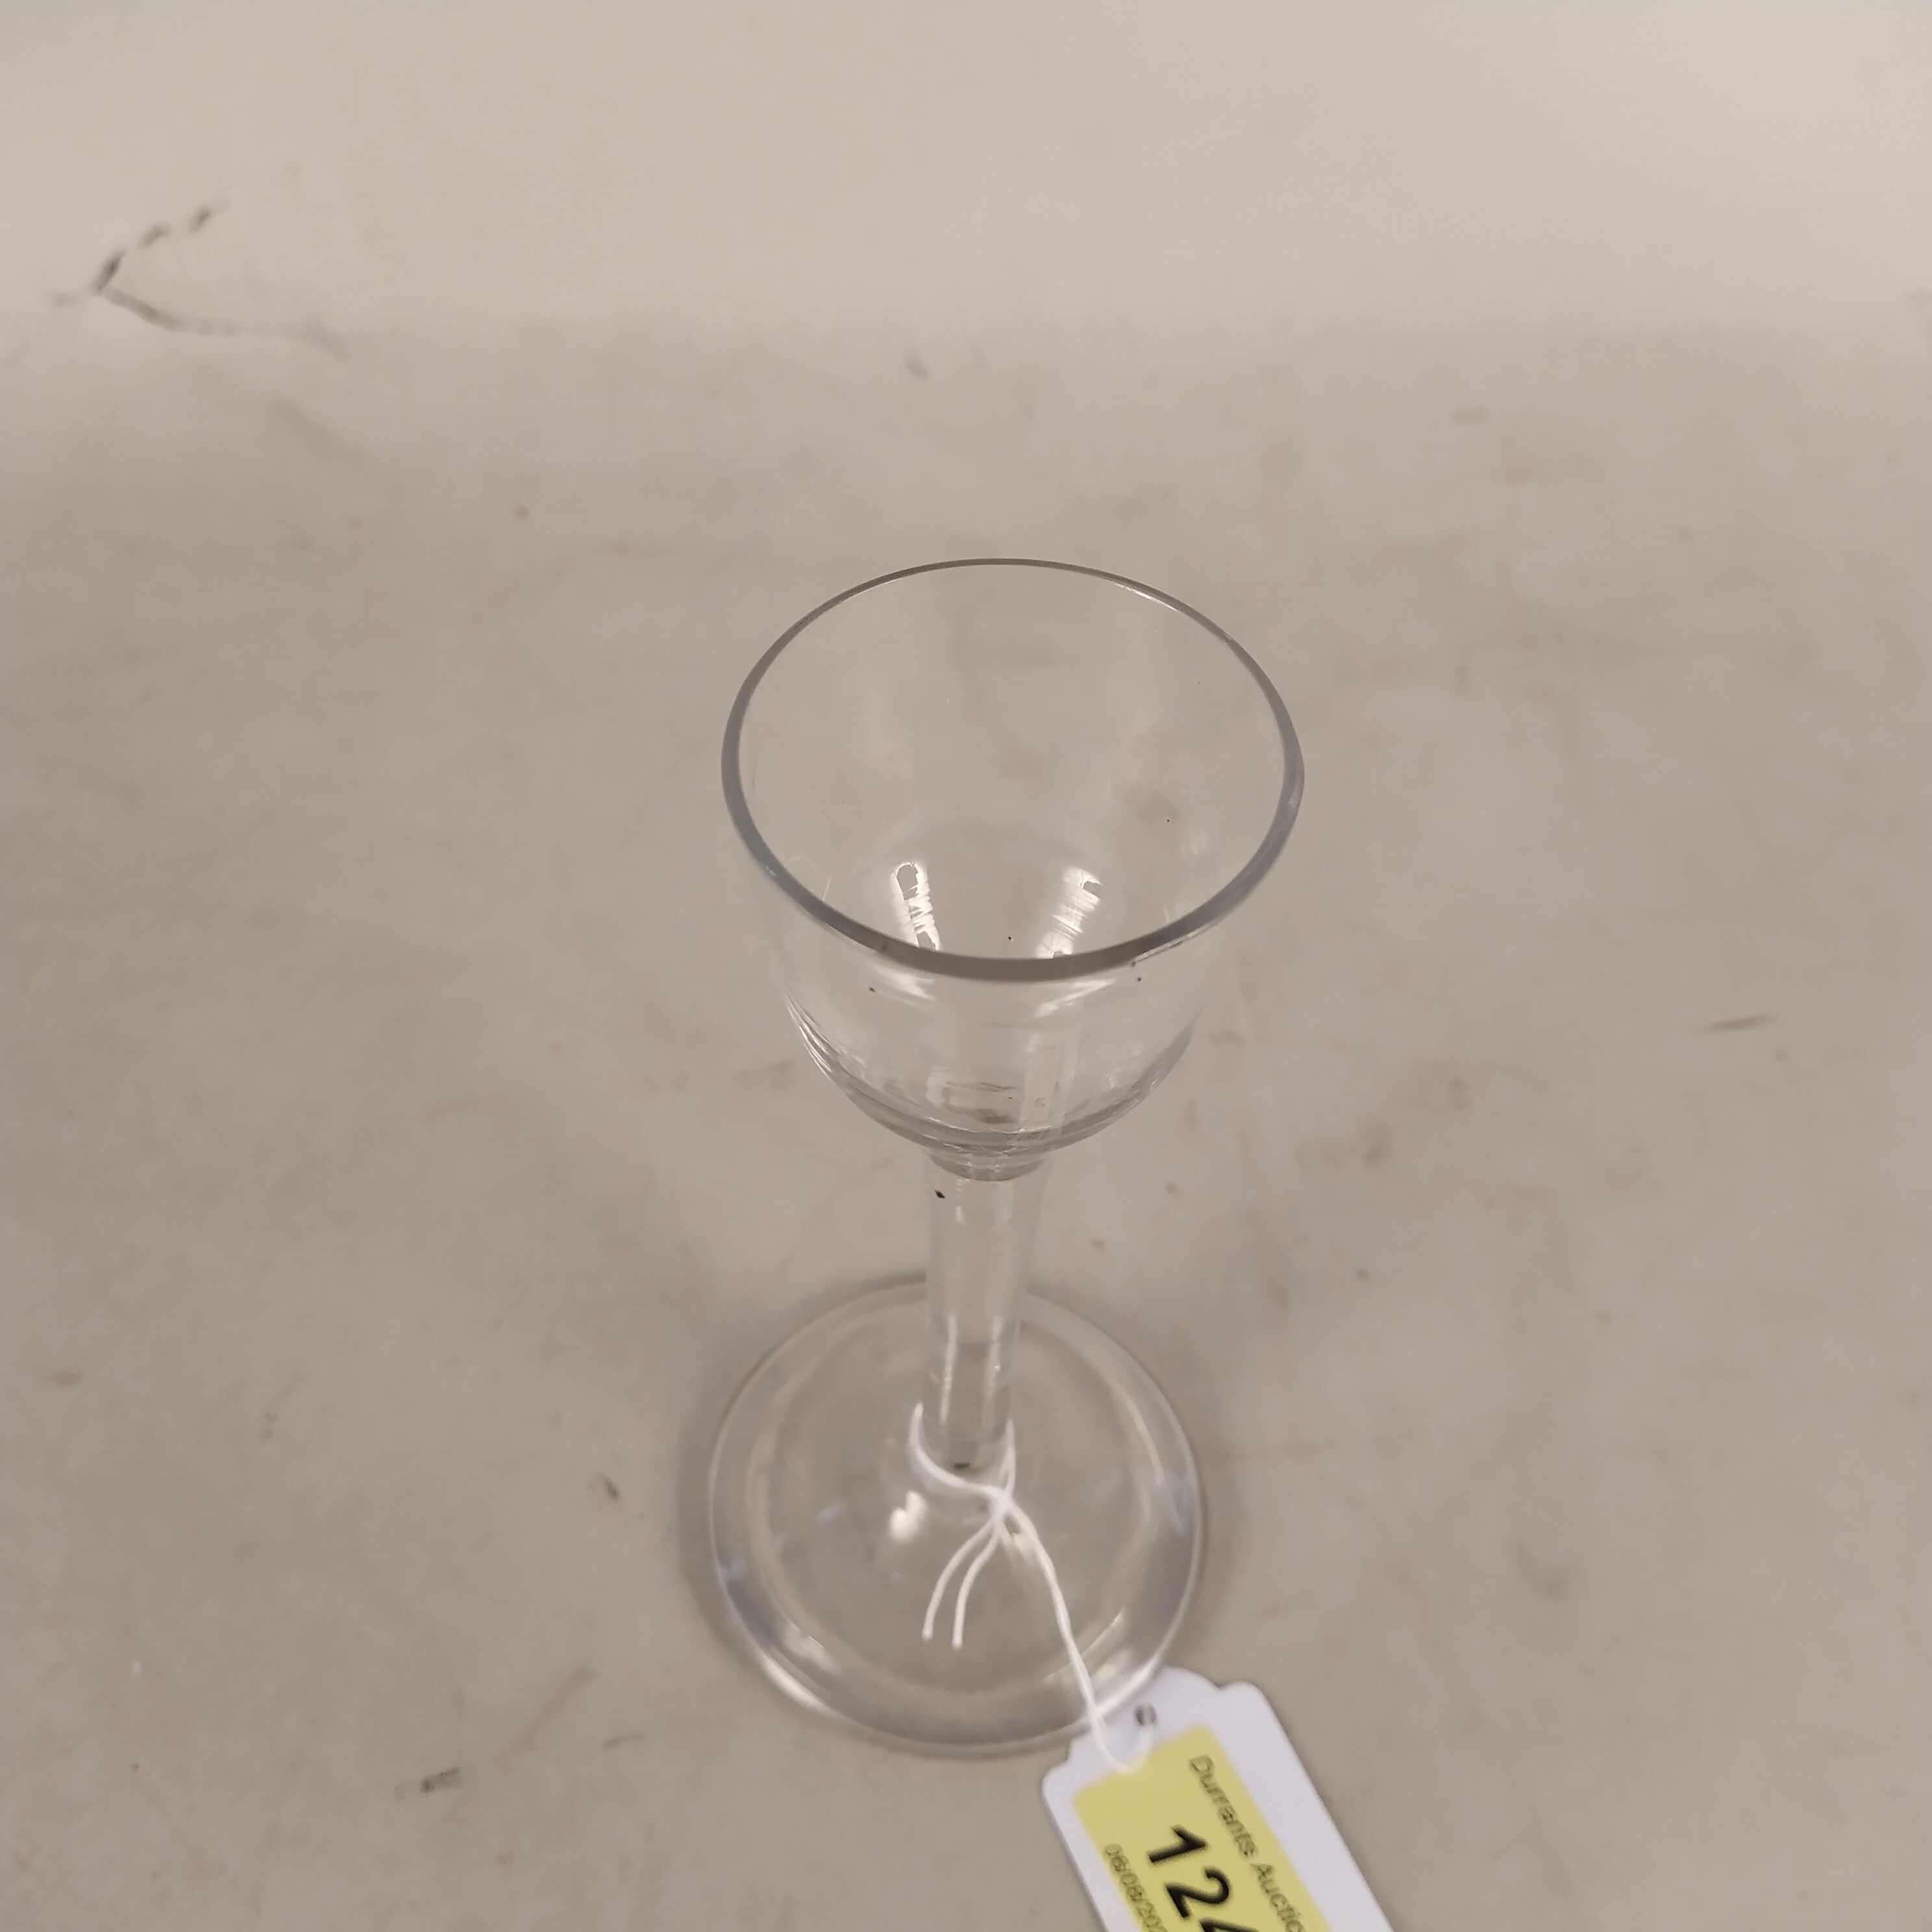 An English cordial glass c1750 with drawn ogee shaped bowl and plain stem with basal knop, - Image 2 of 3